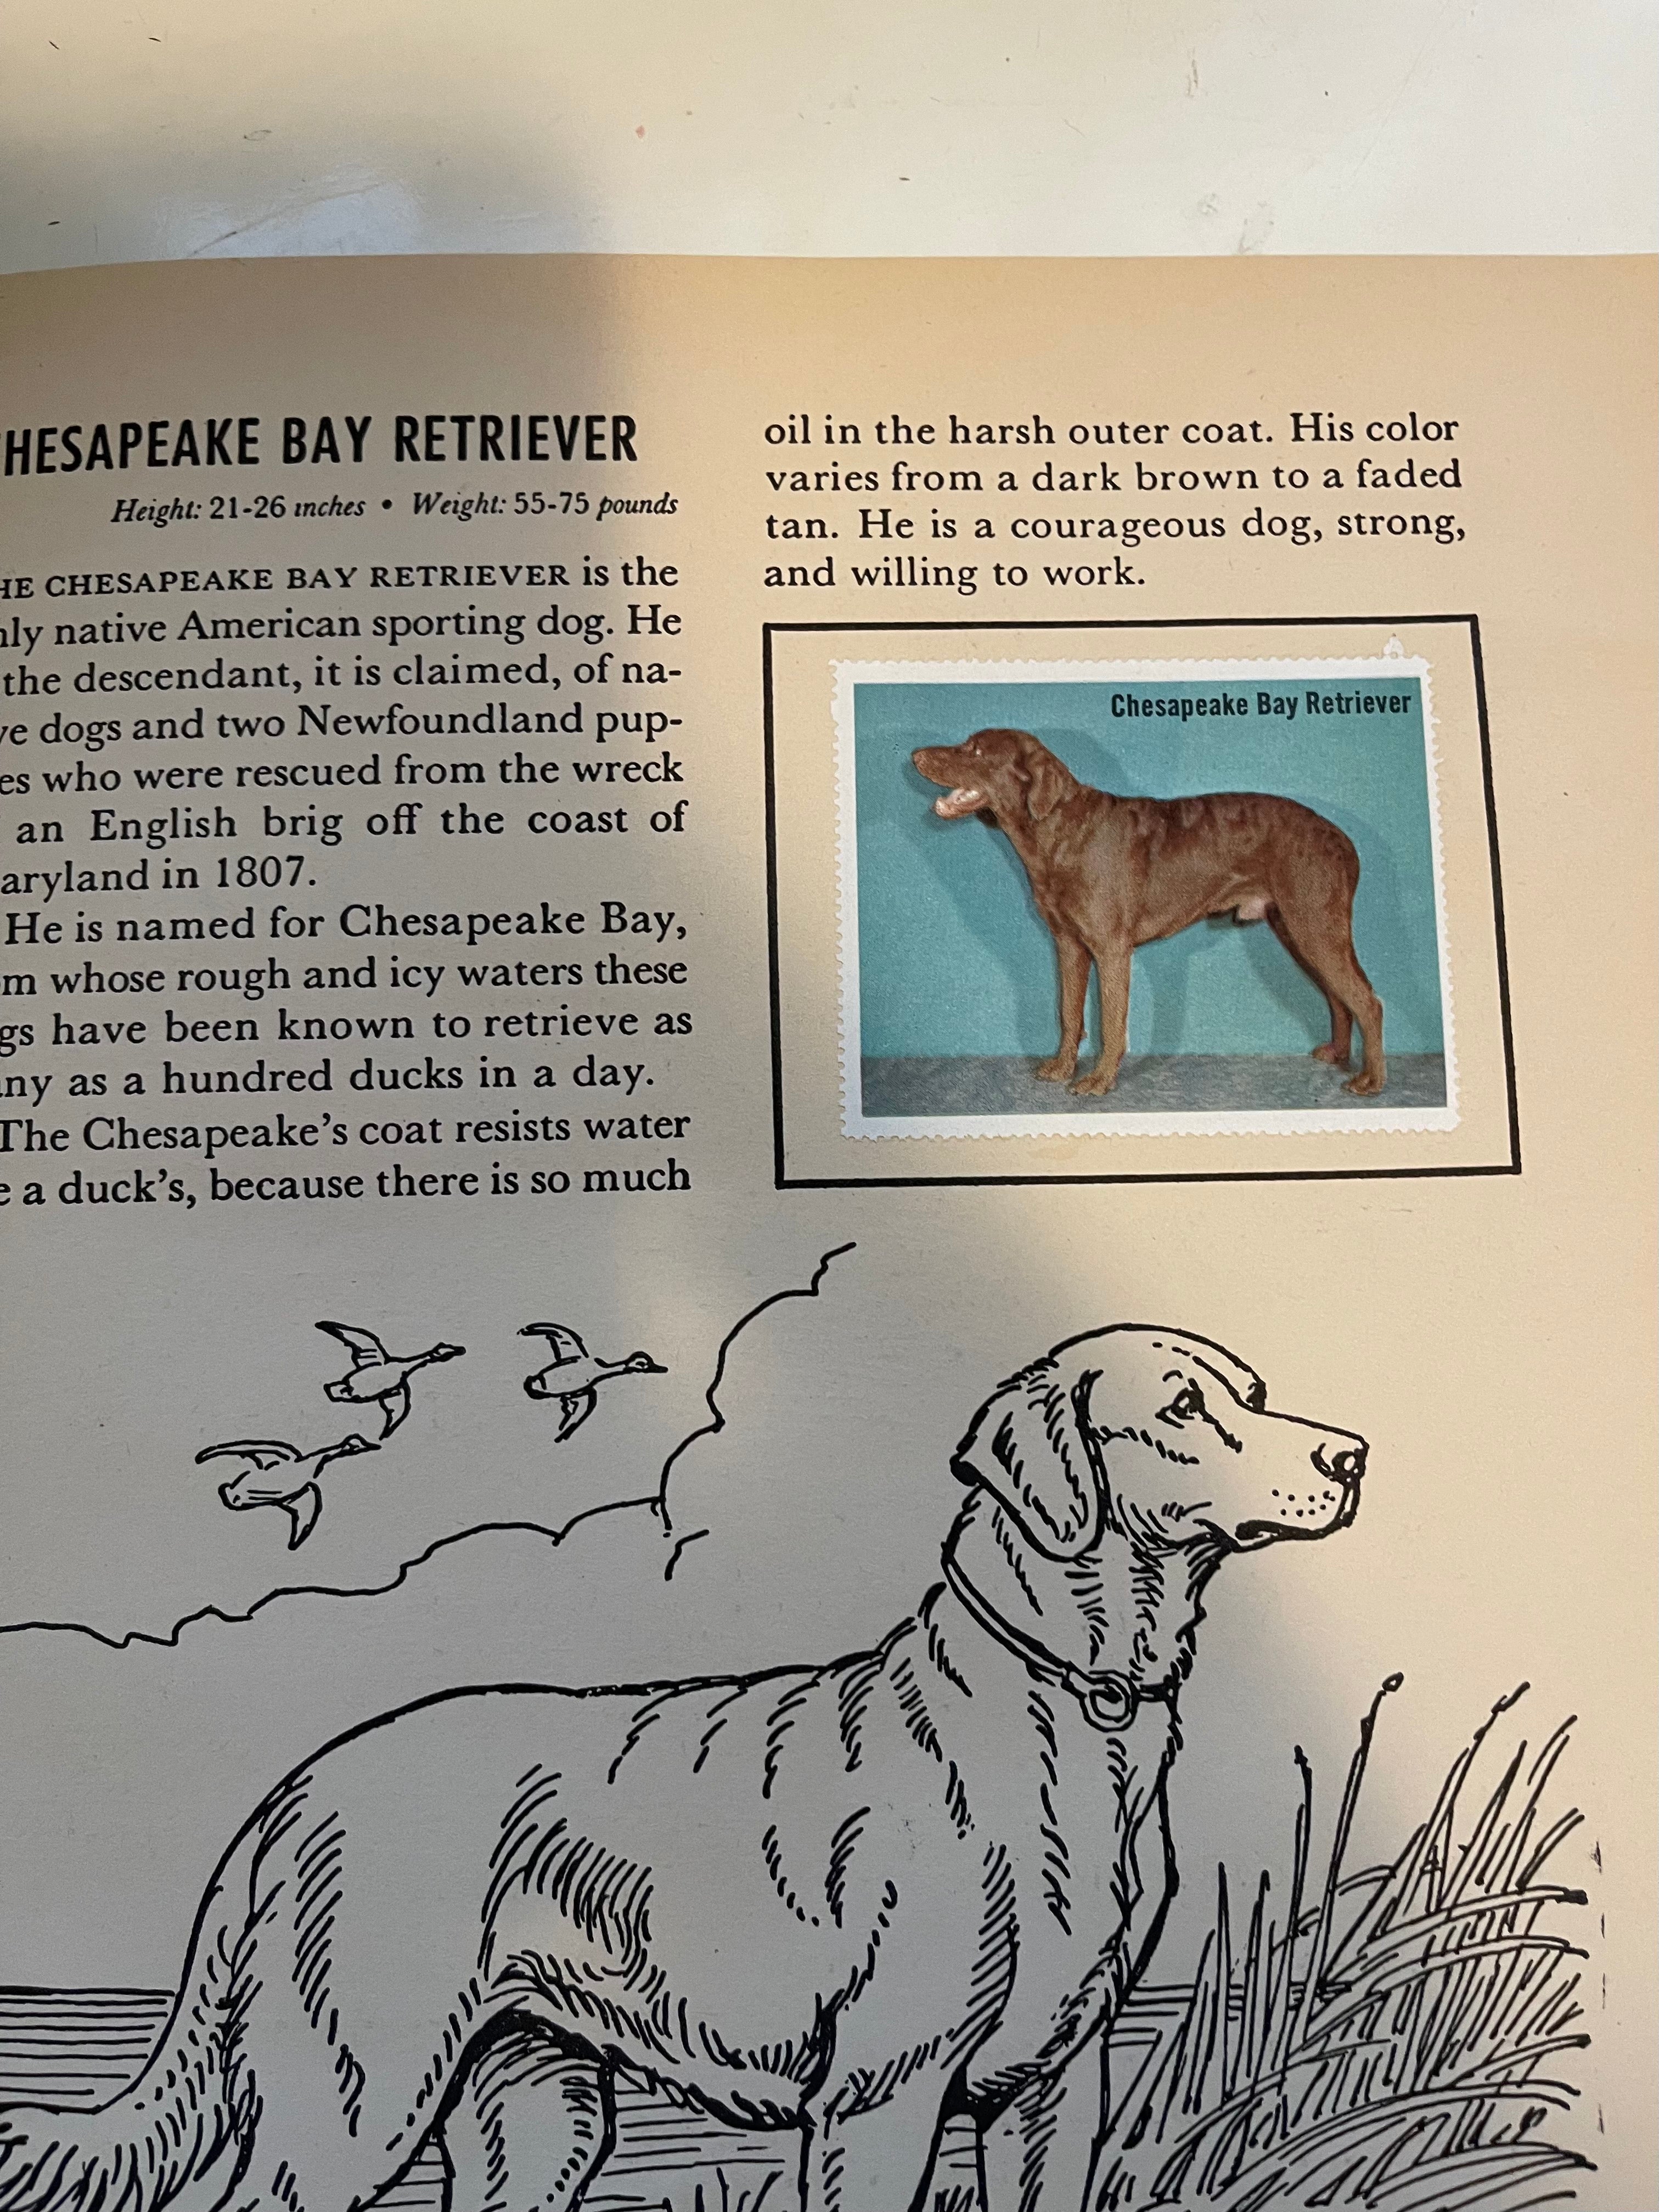 Dogs rare Stamps set in book 1953